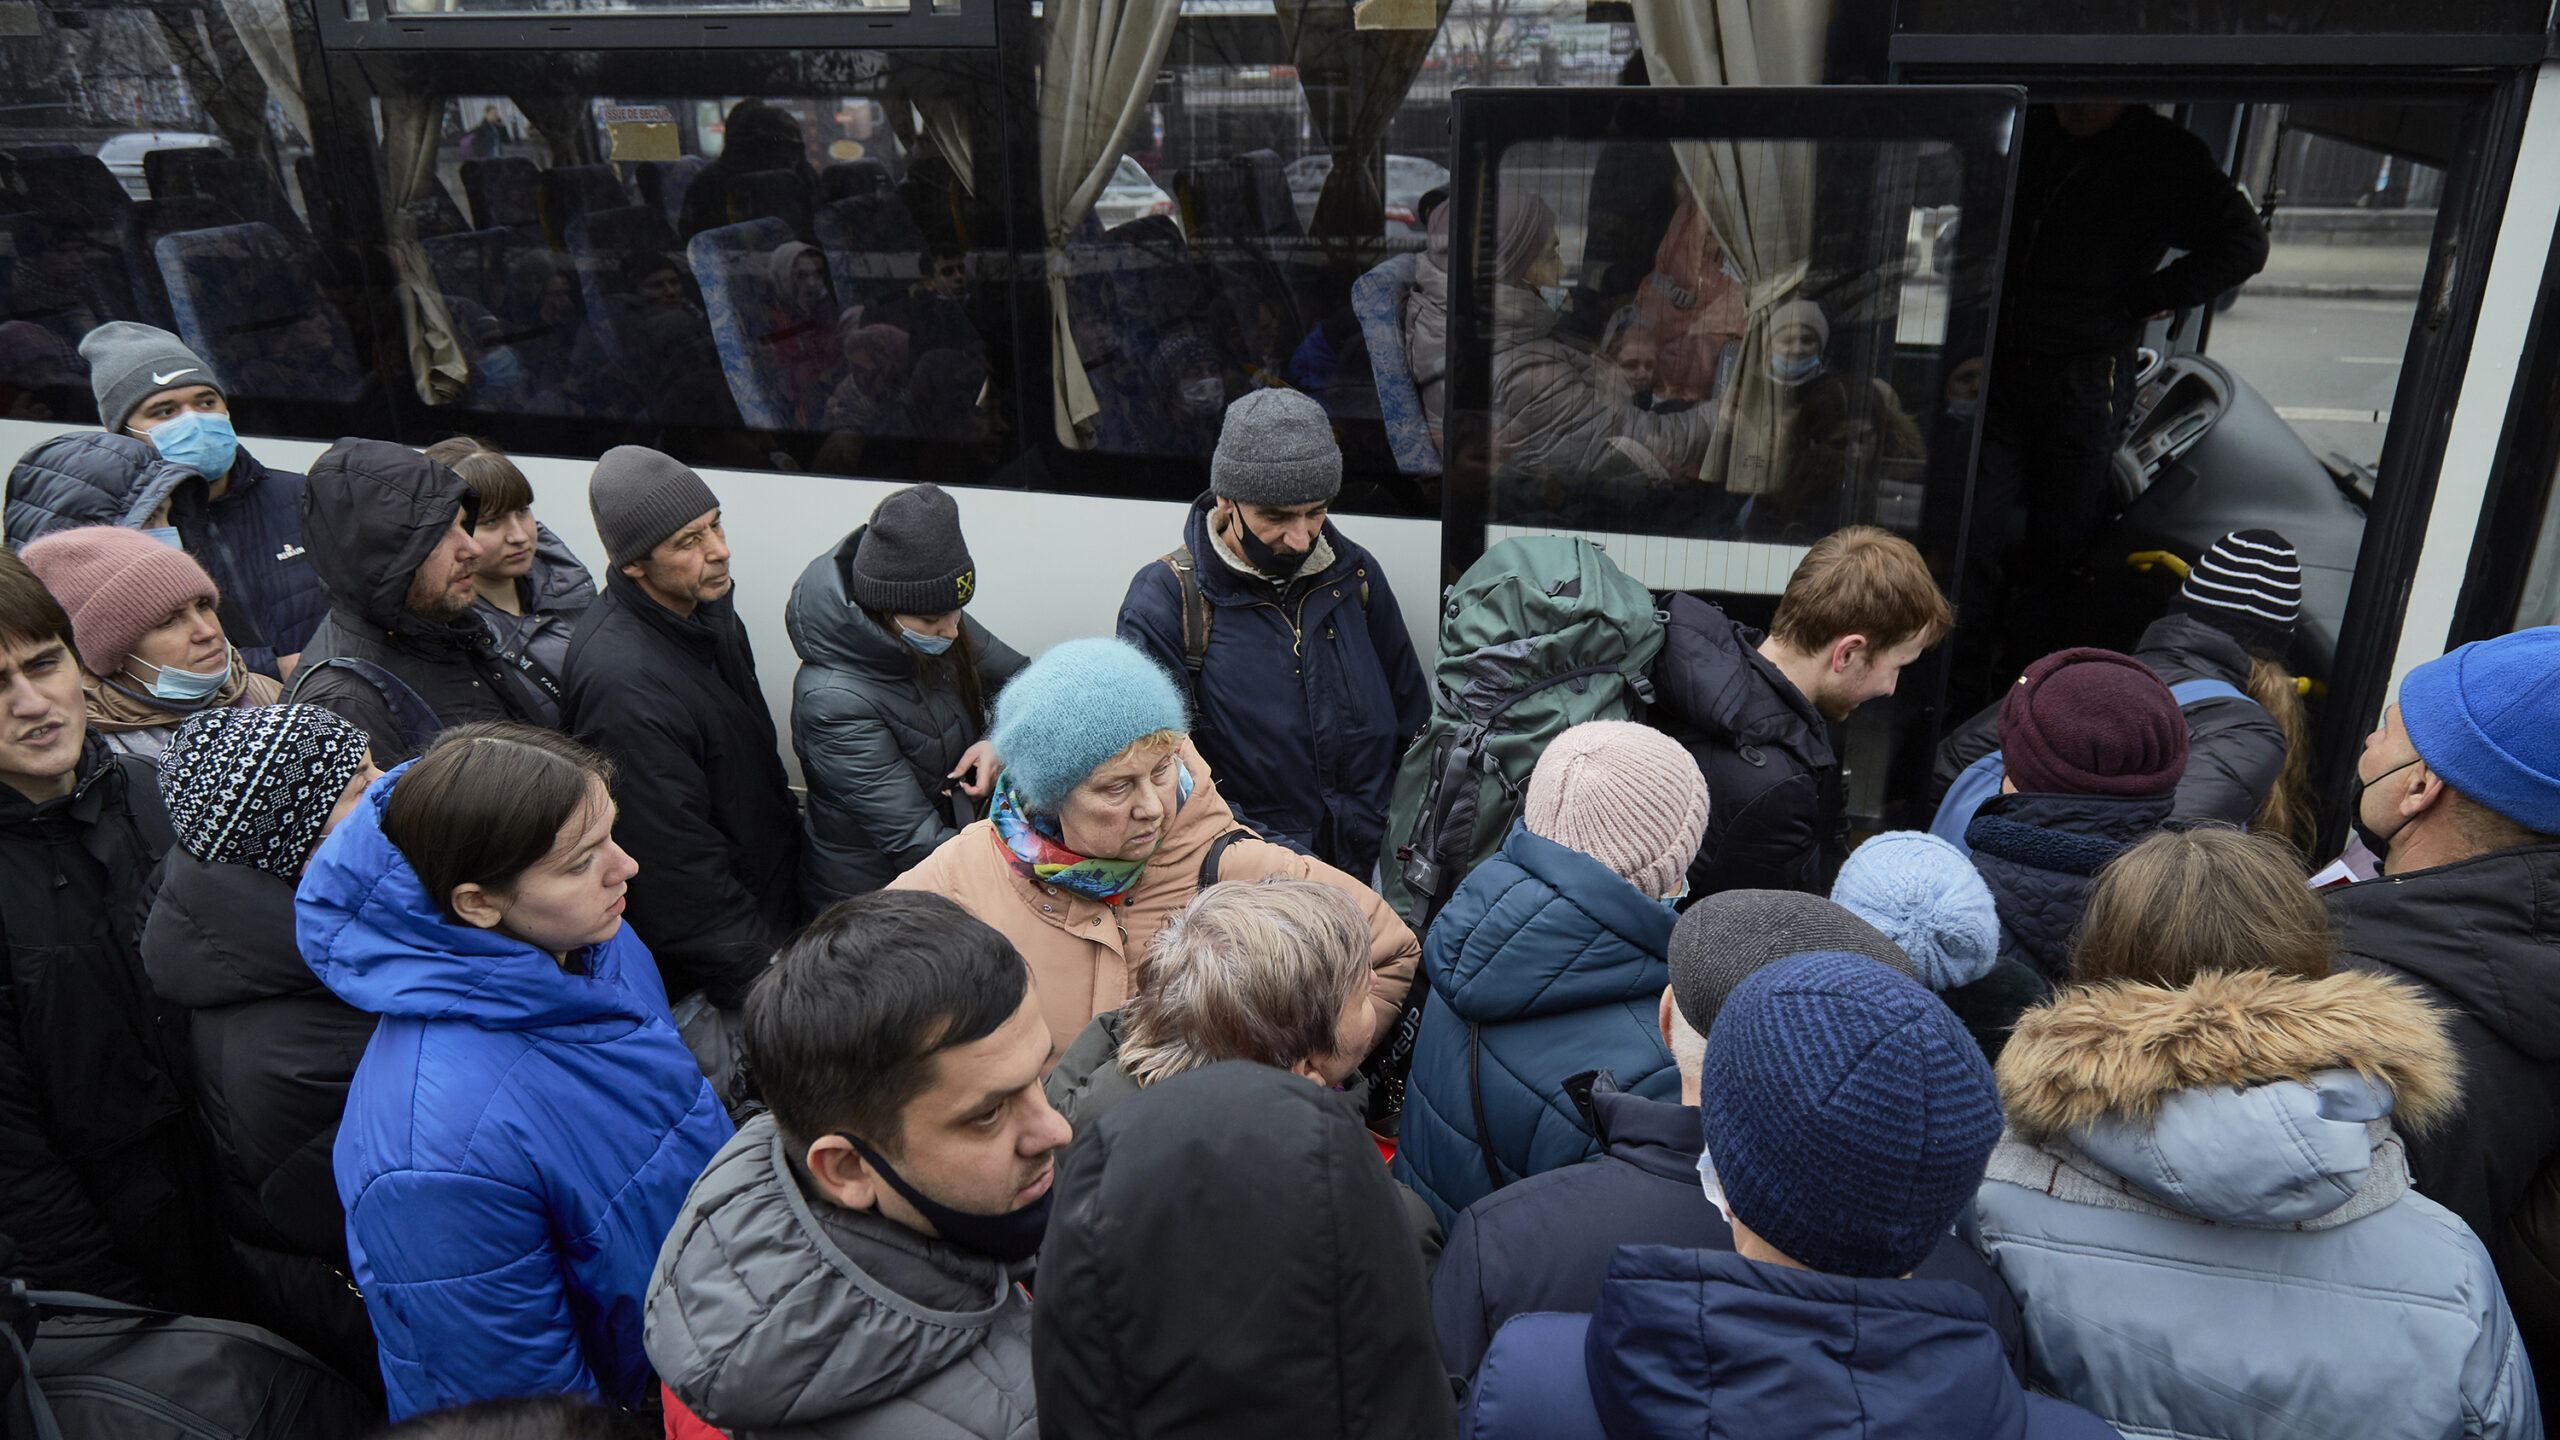 KYIV, UKRAINE – FEBRUARY 24: People board a bus as they attempt to evacuate the city on February 24, 2022 in Kyiv, Ukraine. Overnight, Russia began a large-scale attack on Ukraine, with explosions reported in multiple cities and far outside the restive eastern regions held by Russian-backed rebels. (Photo by Pierre Crom/Getty Images) 